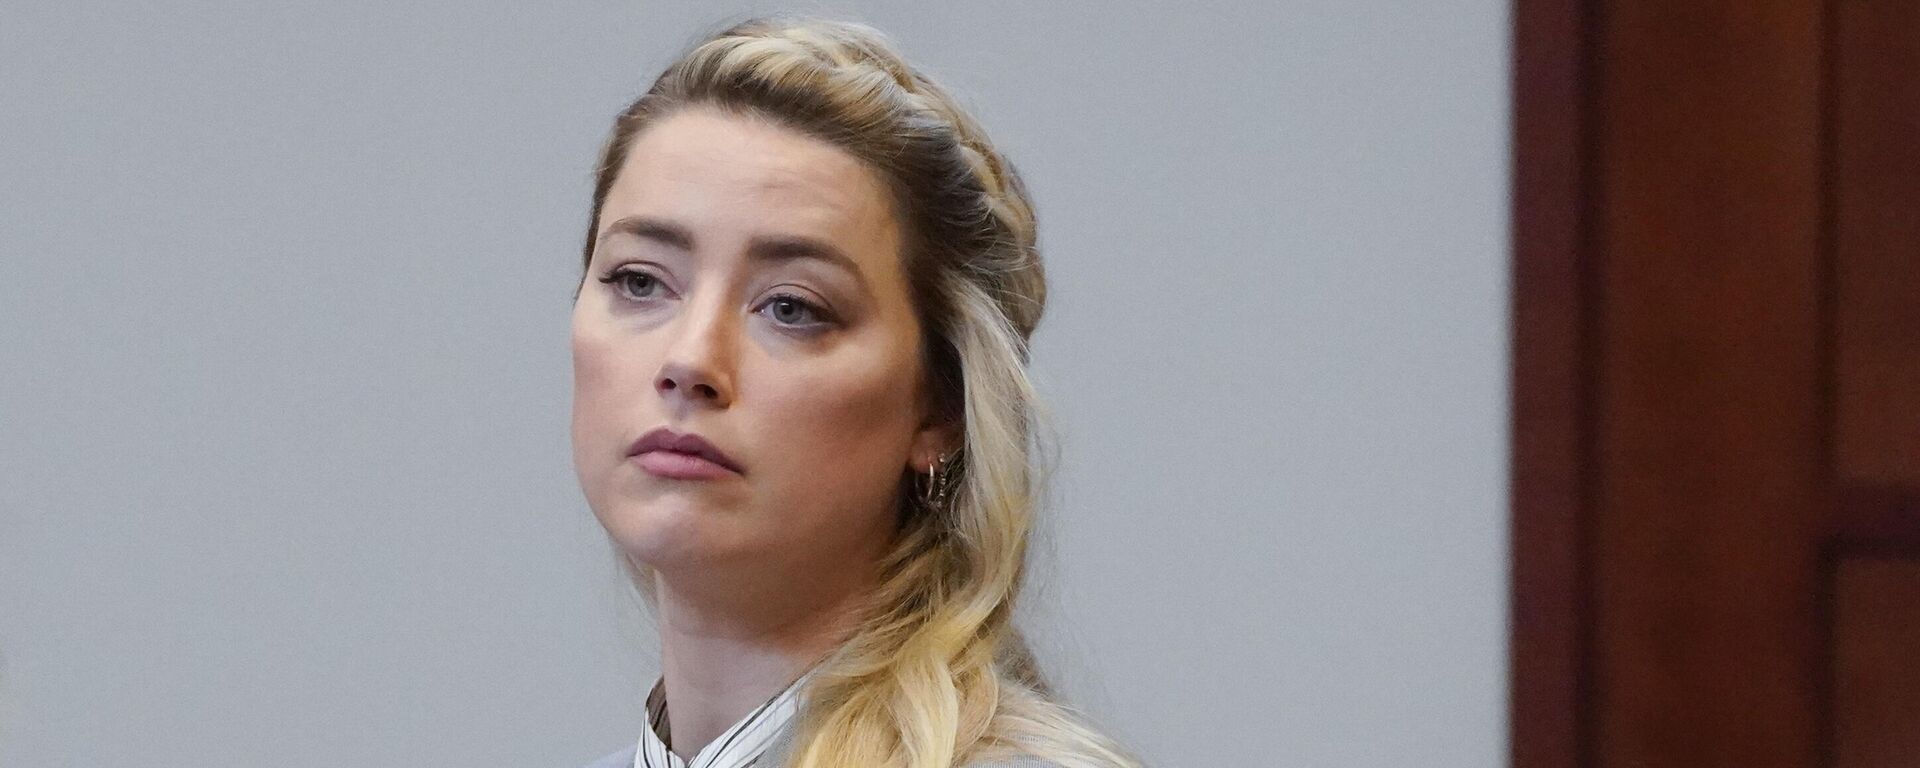 Actor Amber Heard stands in the courtroom at the Fairfax County Circuit Courthouse in Fairfax, Va., Friday, May 27, 2022 - Sputnik International, 1920, 02.06.2022